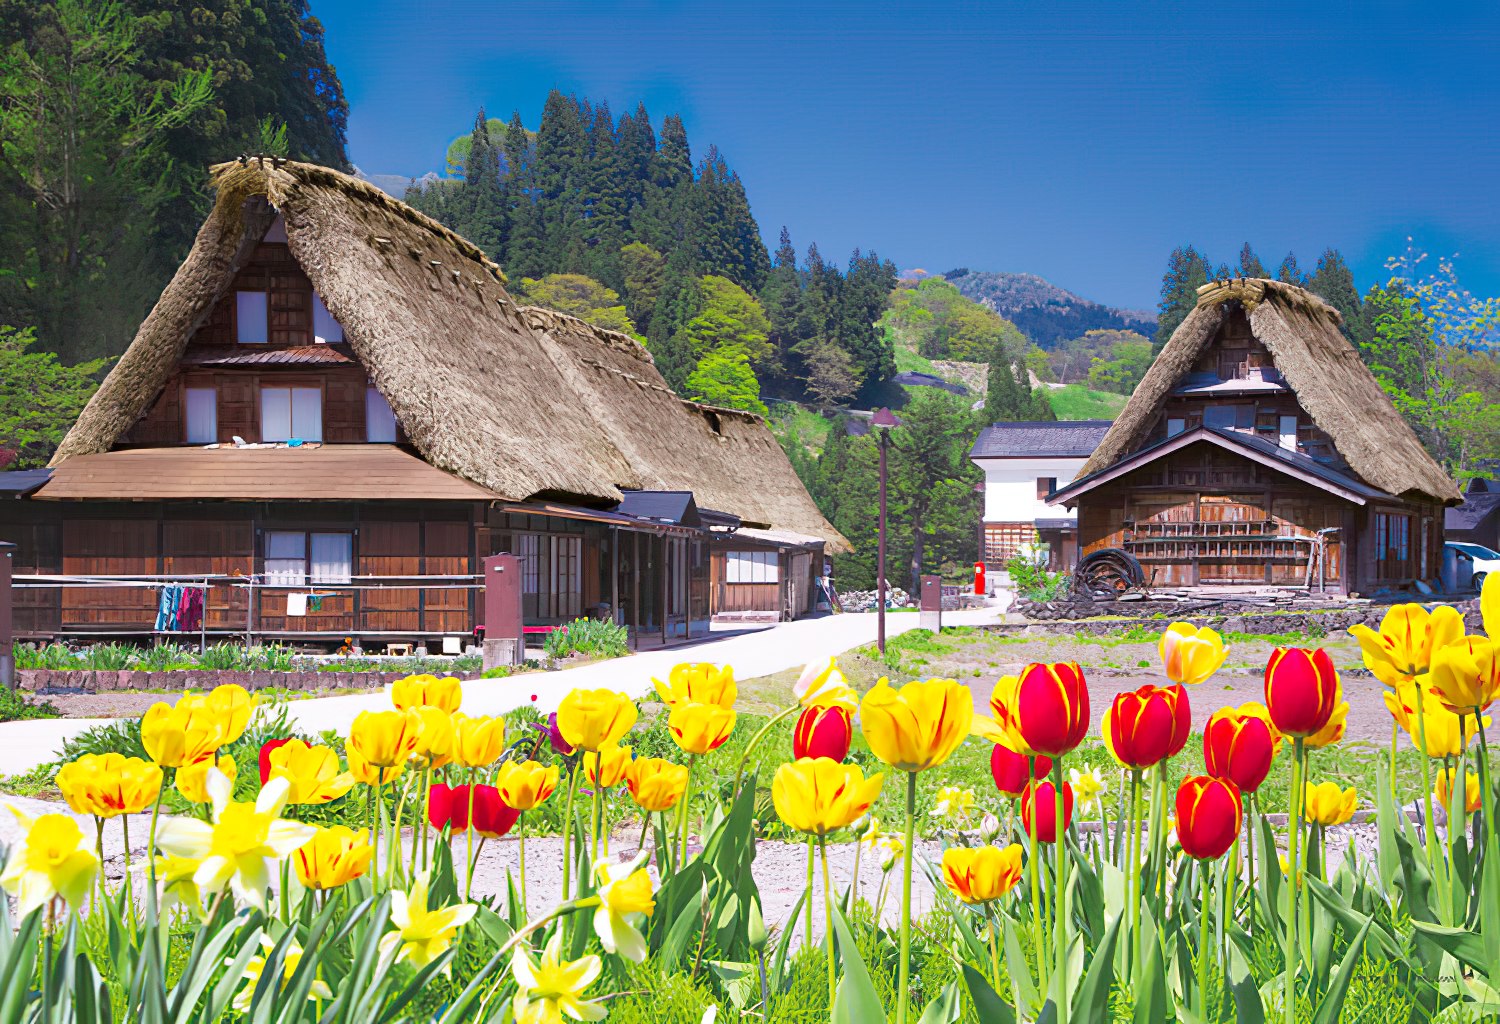 Yanoman • Japan • House with Thatched Roof and Tulips, Gifu　300 PCS　Jigsaw Puzzle